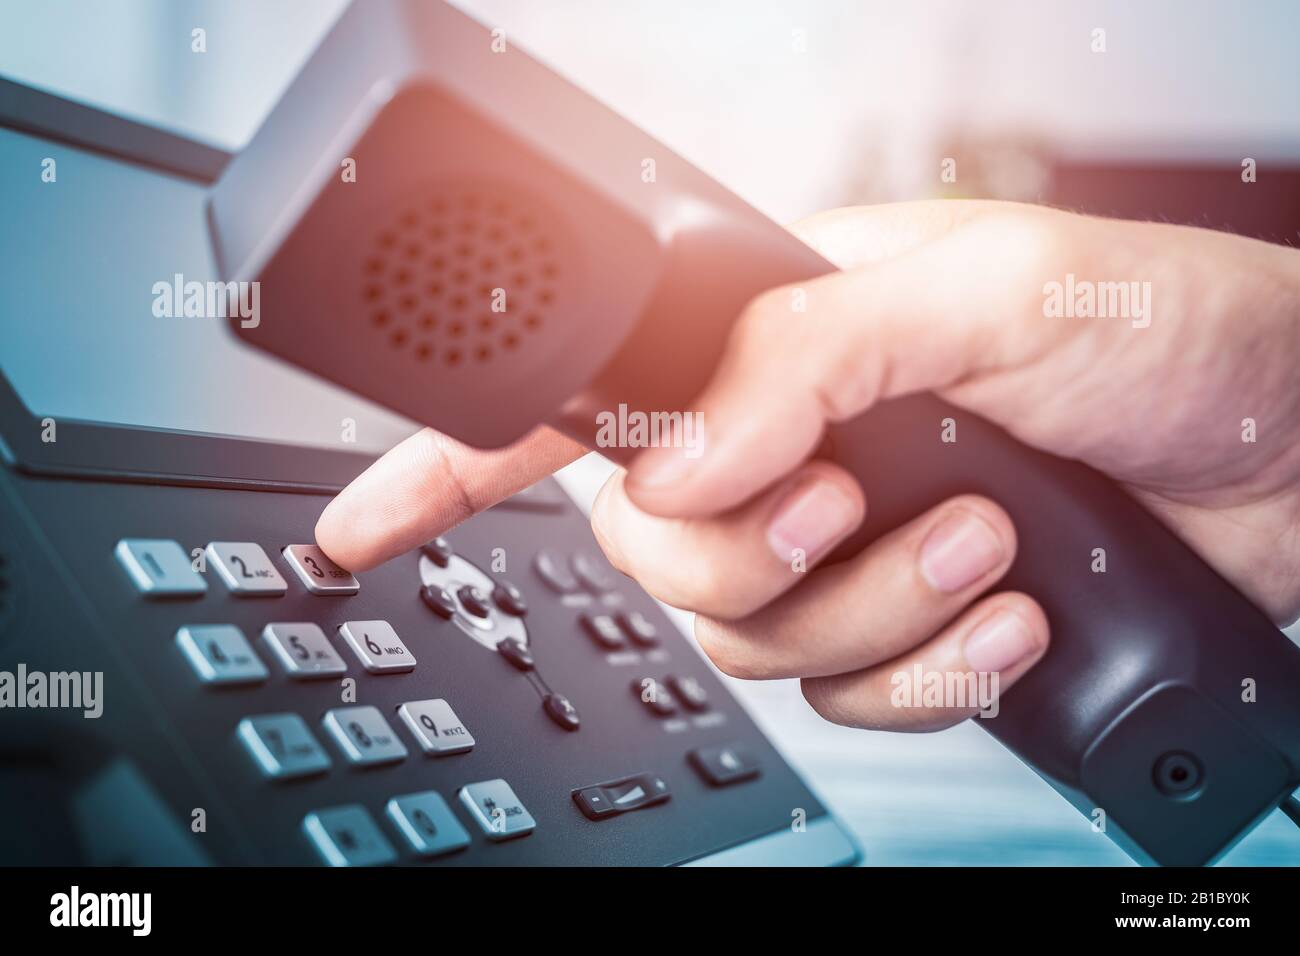 Communication support, call center and customer service help desk. Using a telephone keypad. Stock Photo